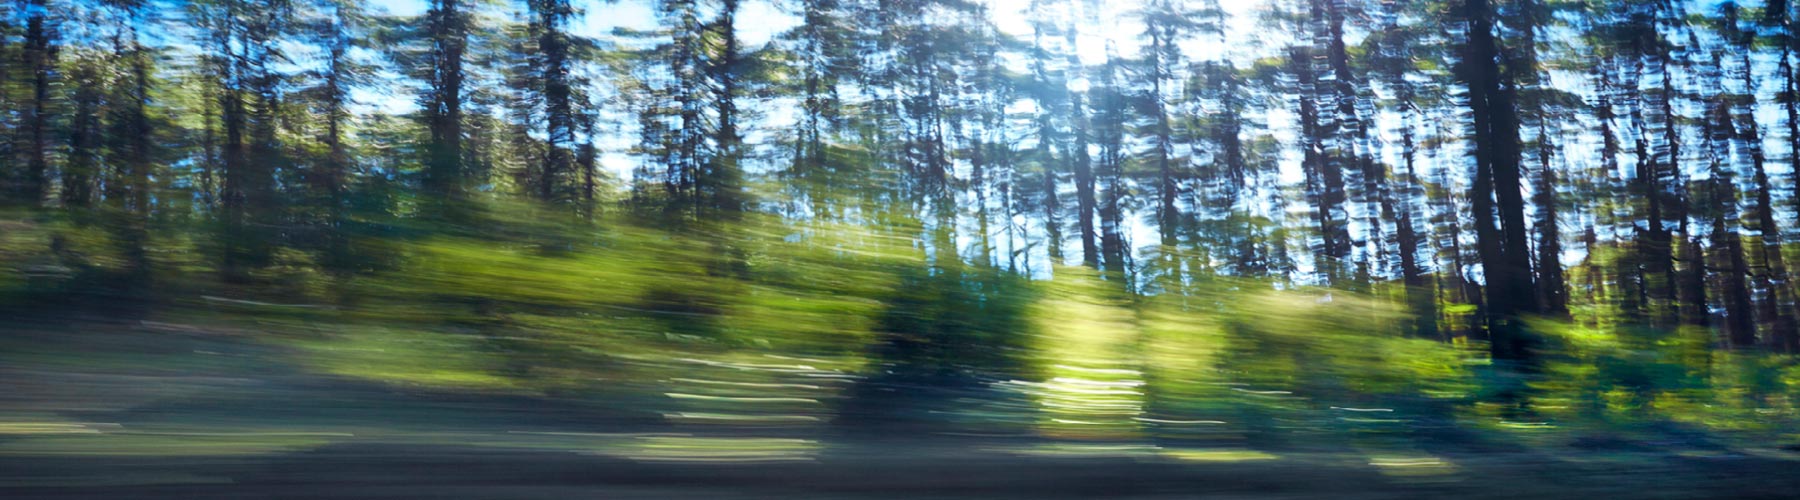 View of blurred trees in a forest